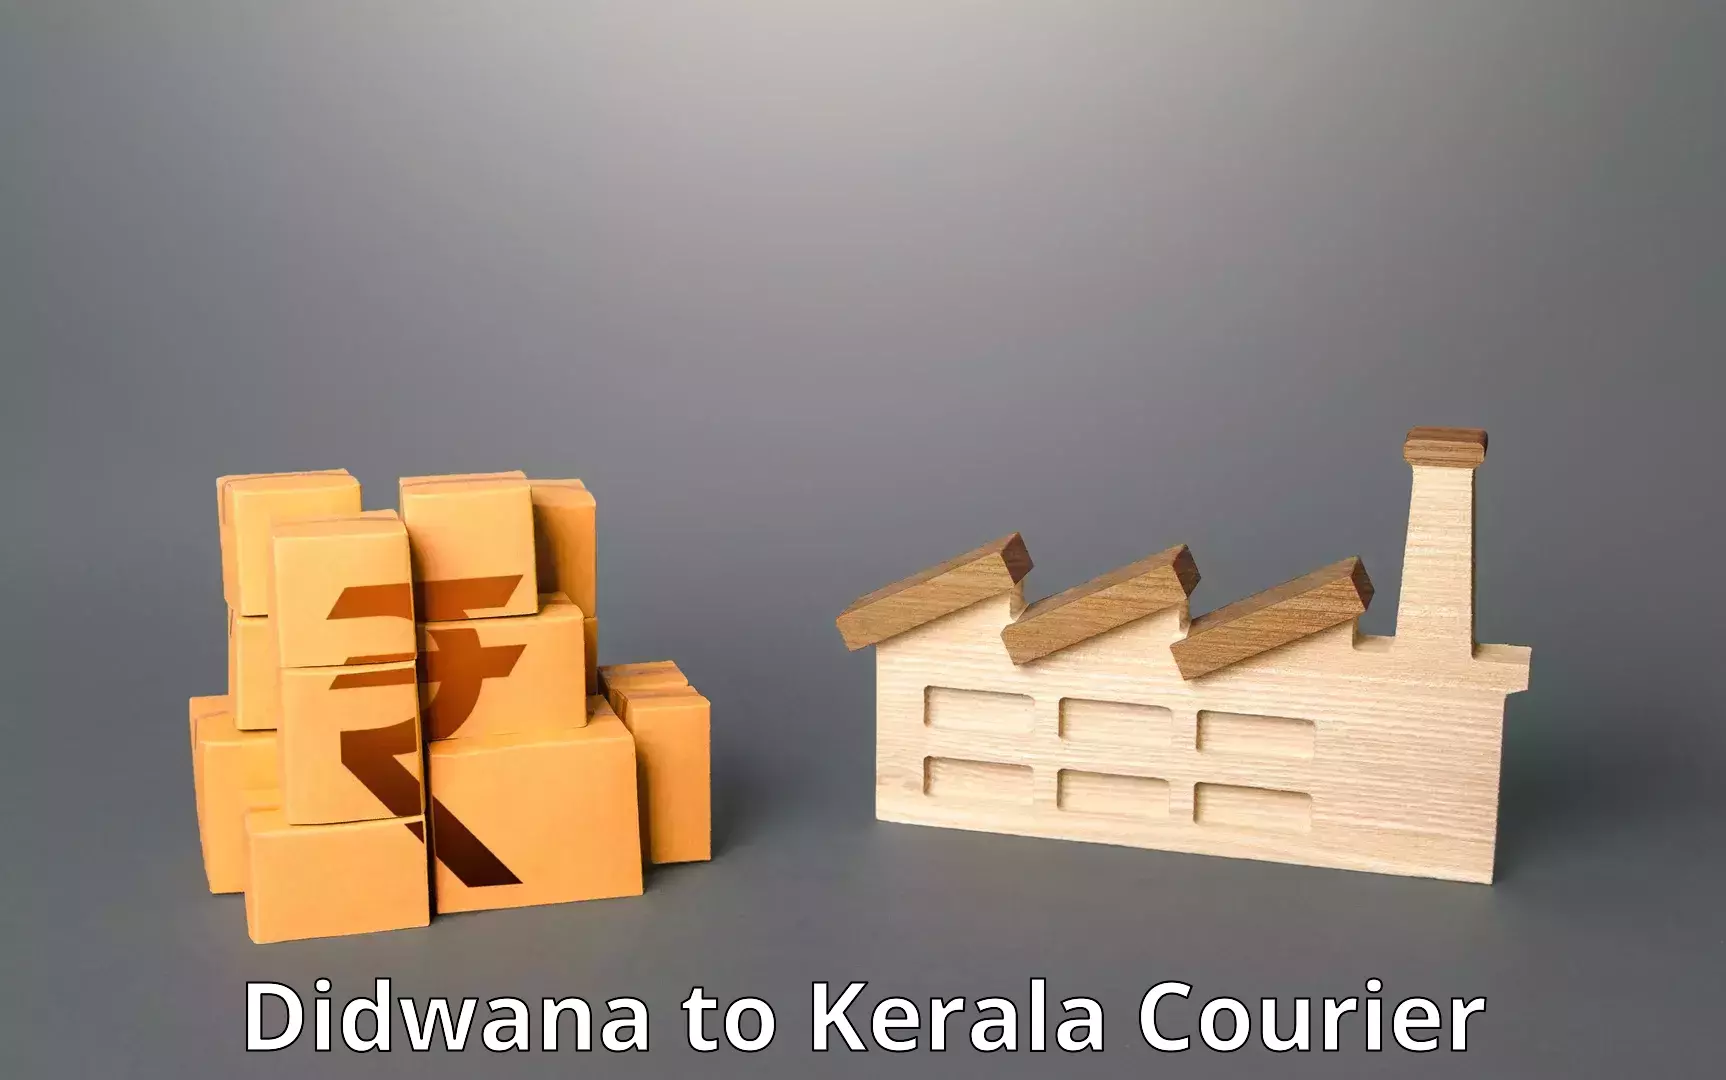 Express delivery capabilities Didwana to Munnar